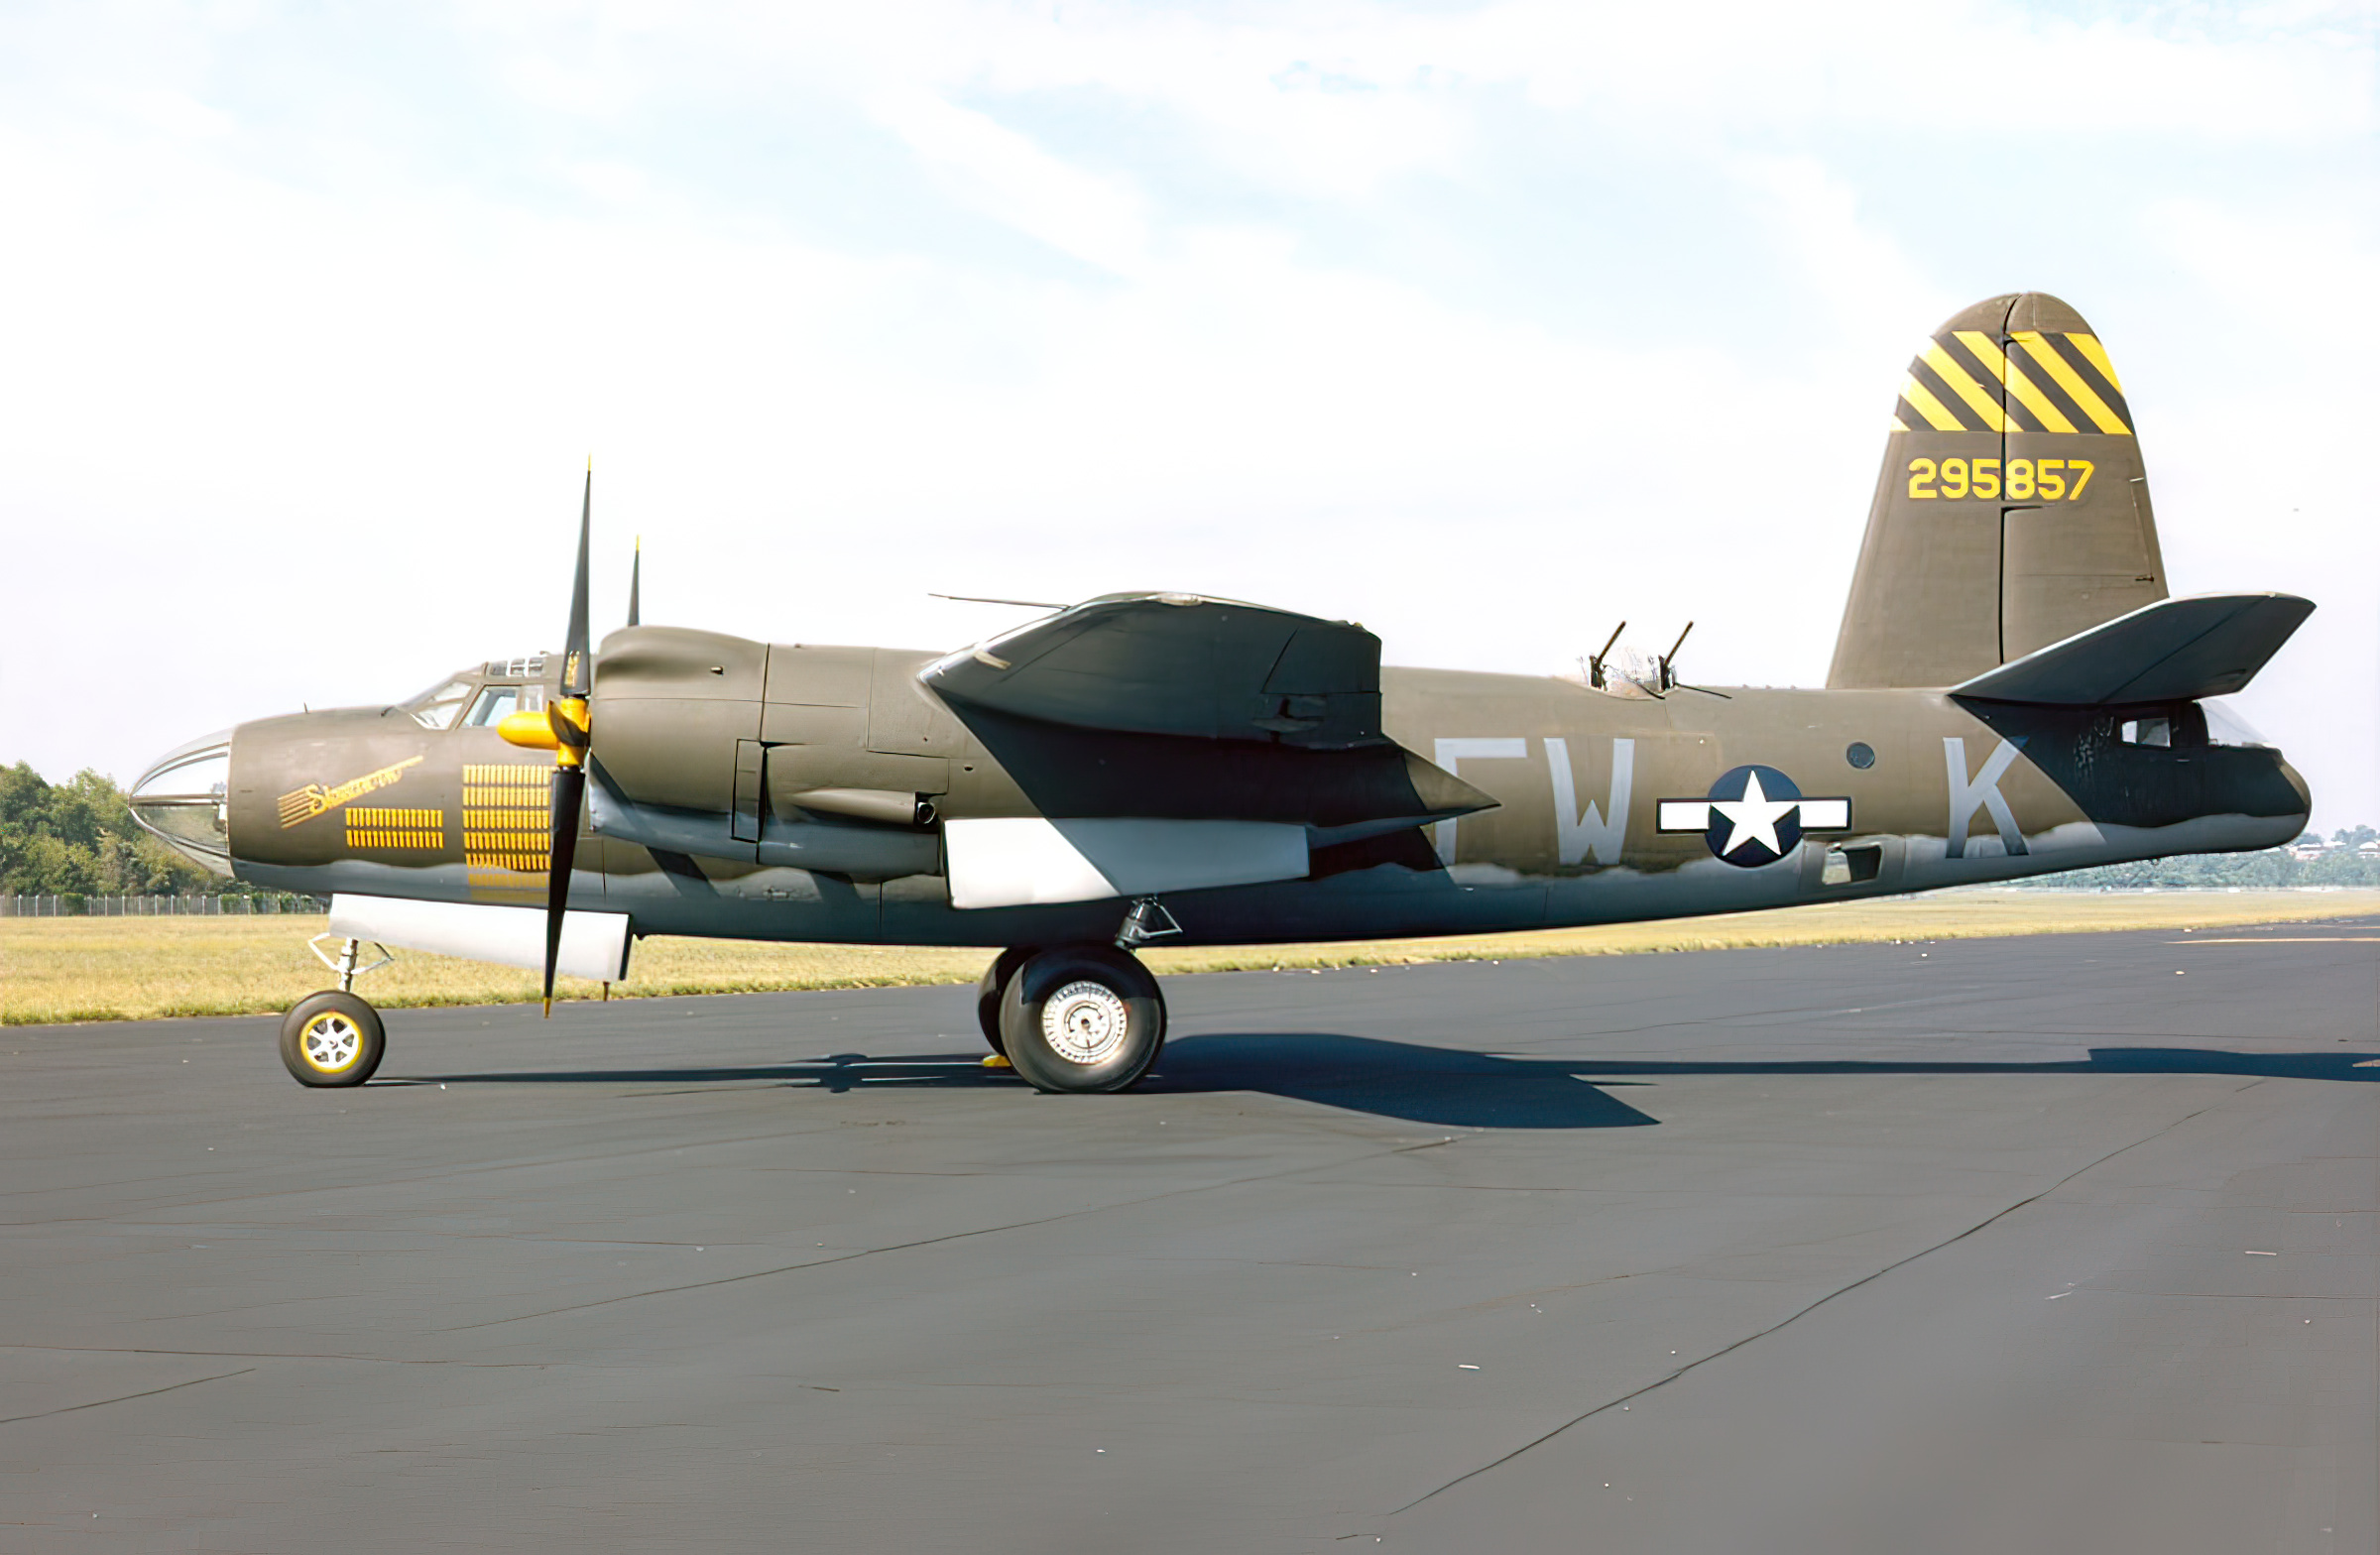 Martin B-26G Marauder at the National Museum of the United States Air Force